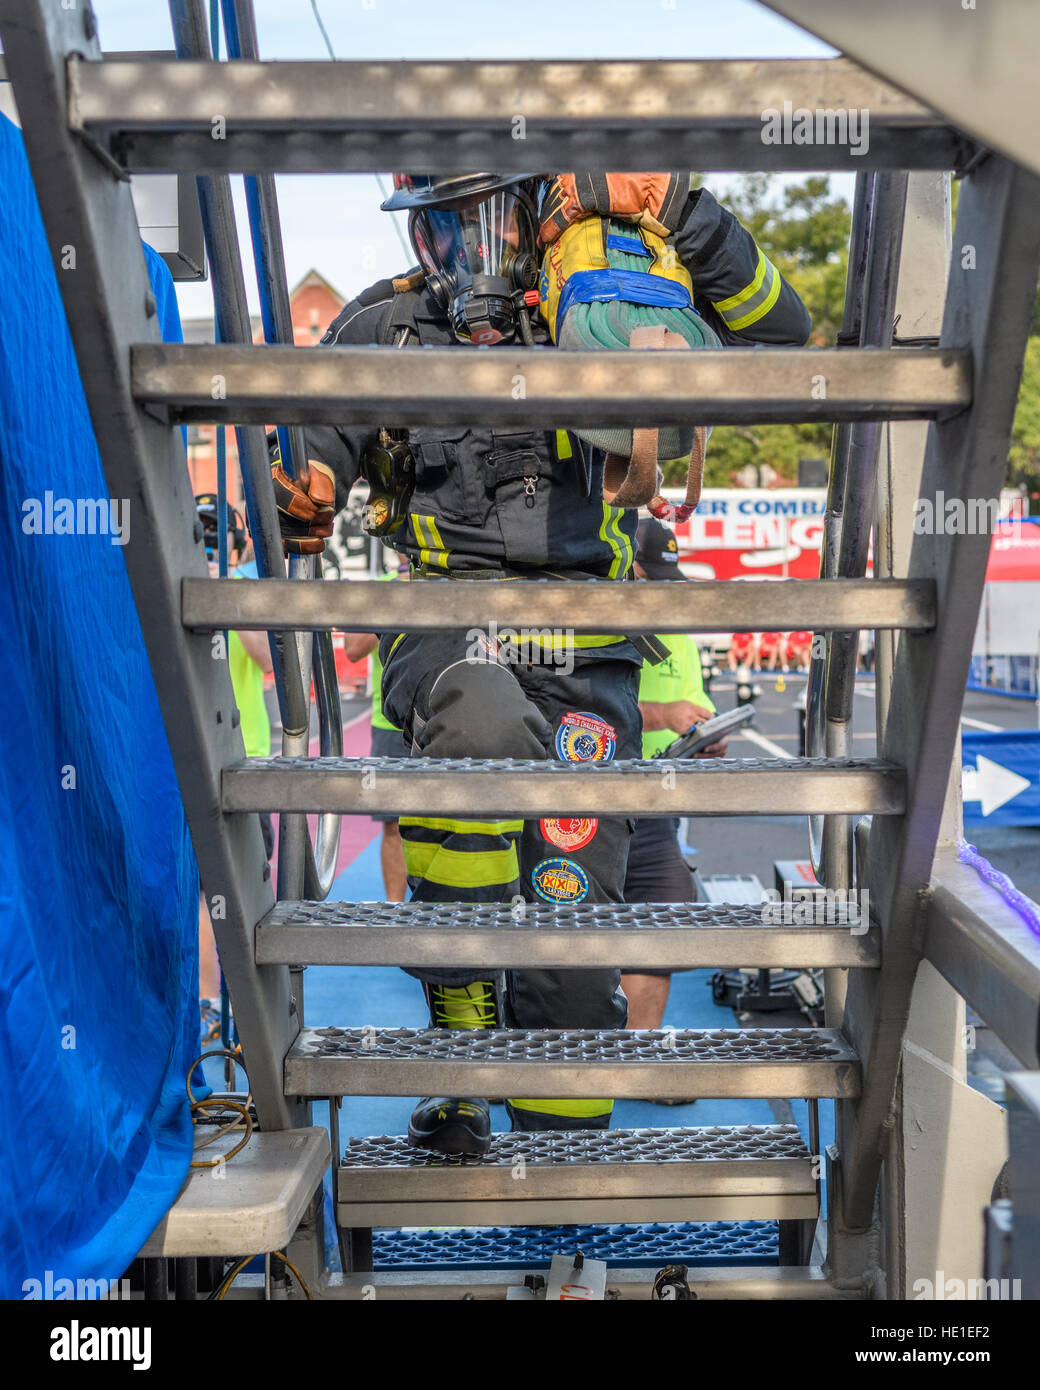 A firefighter starts up stairs on a four story tower carrying bundled hose. Stock Photo